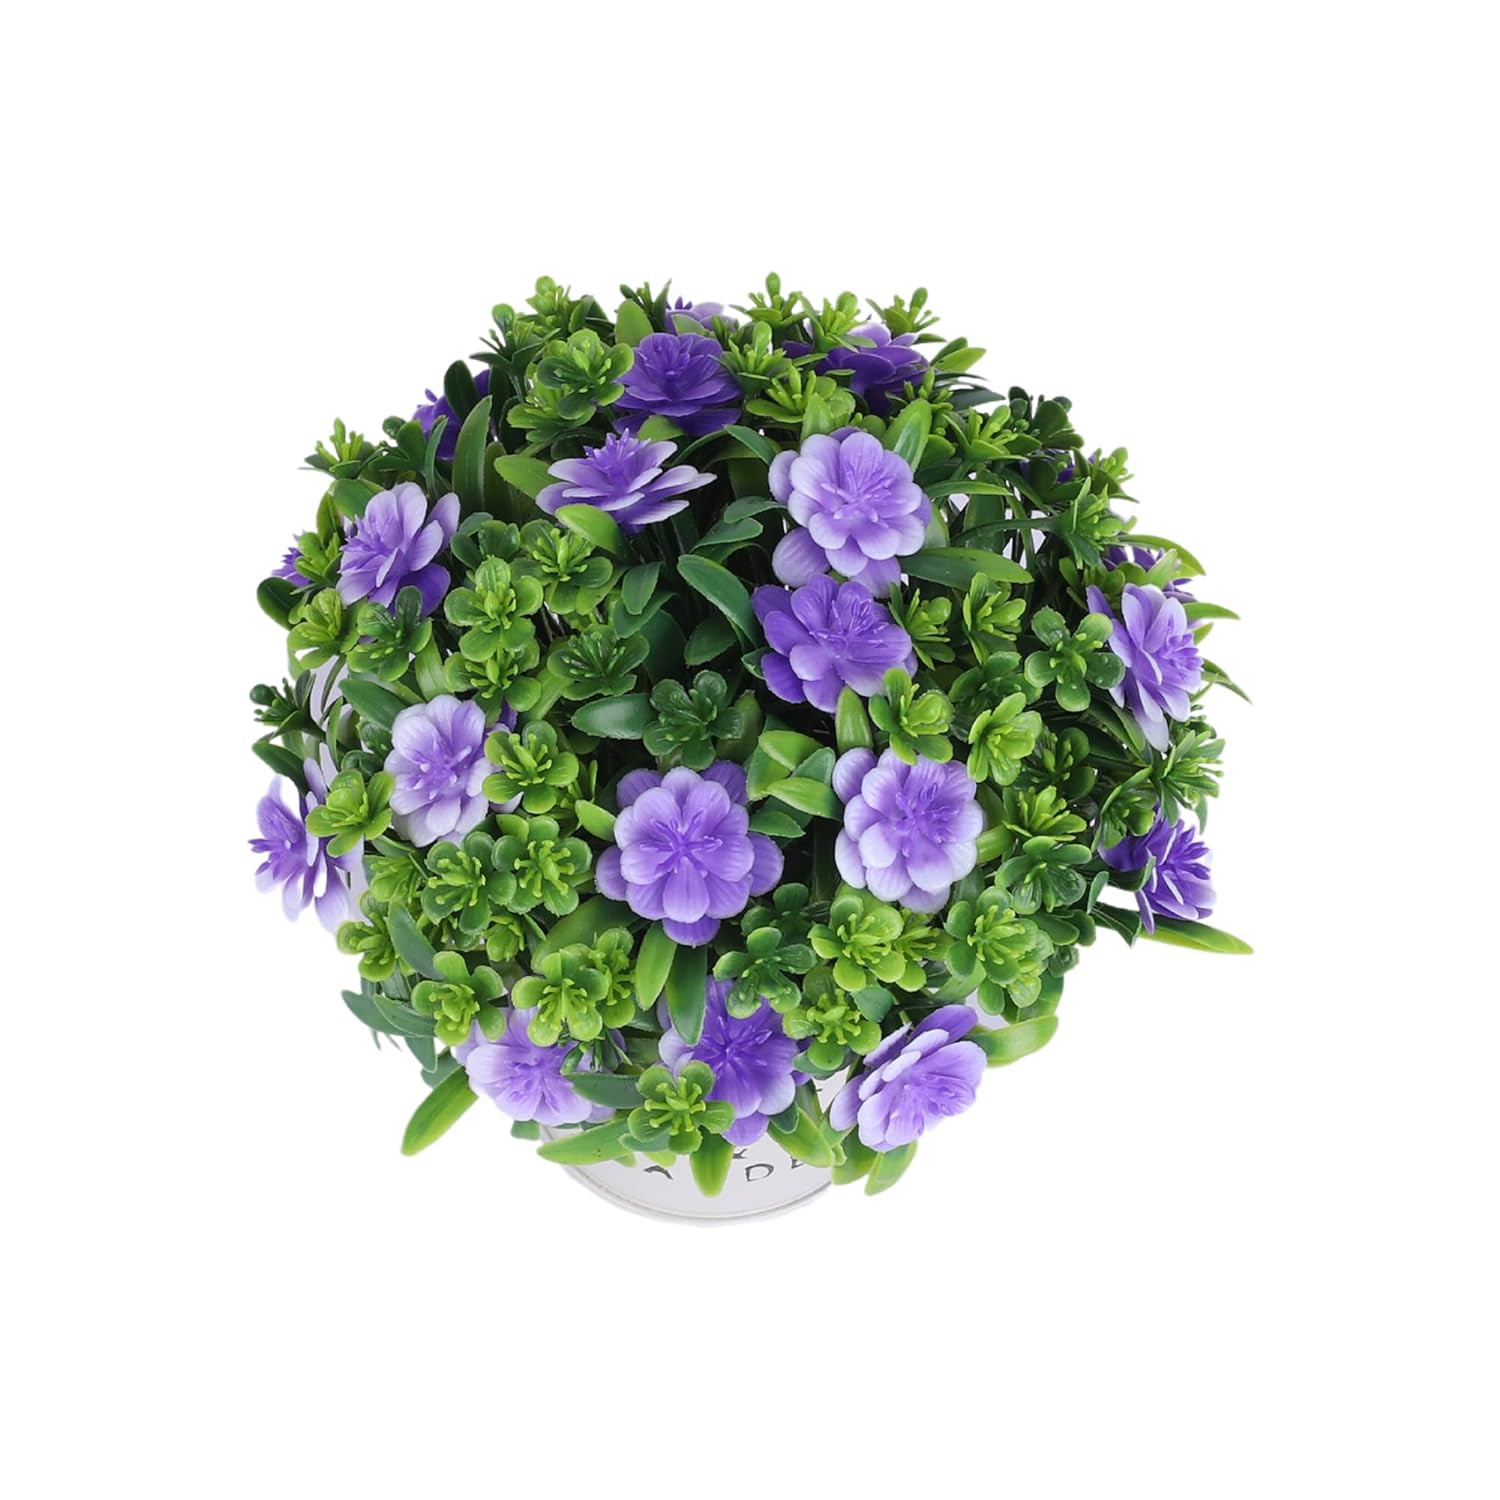 Kuber Industries Artificial Plants for Home DÃ©cor|Natural Looking Indoor Fake Plants with Pot|Artificial Flowers for Decoration (Lavender)